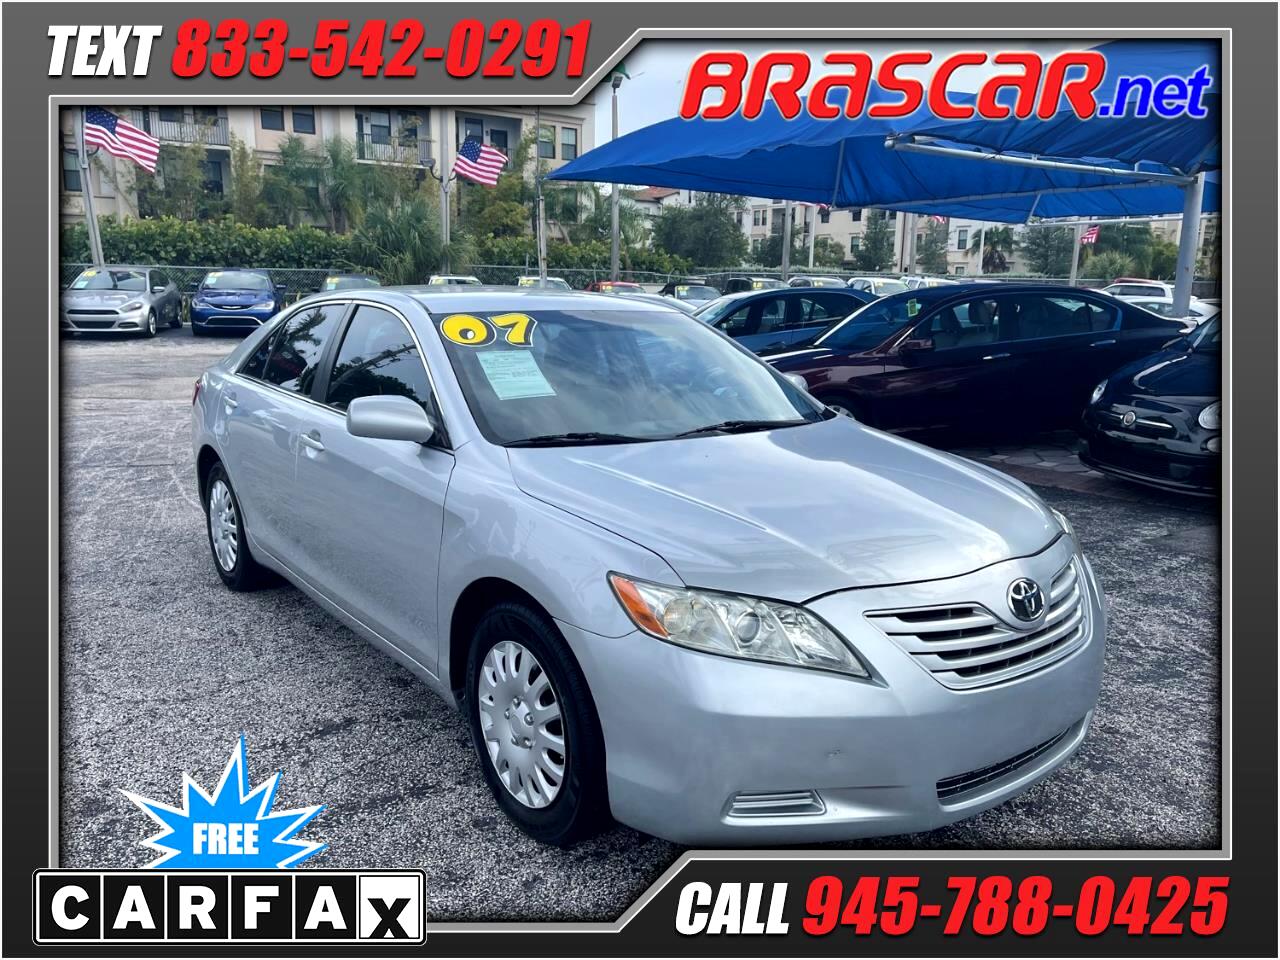 Toyota Camry 4dr Sdn I4 Auto XLE (Natl) 2007